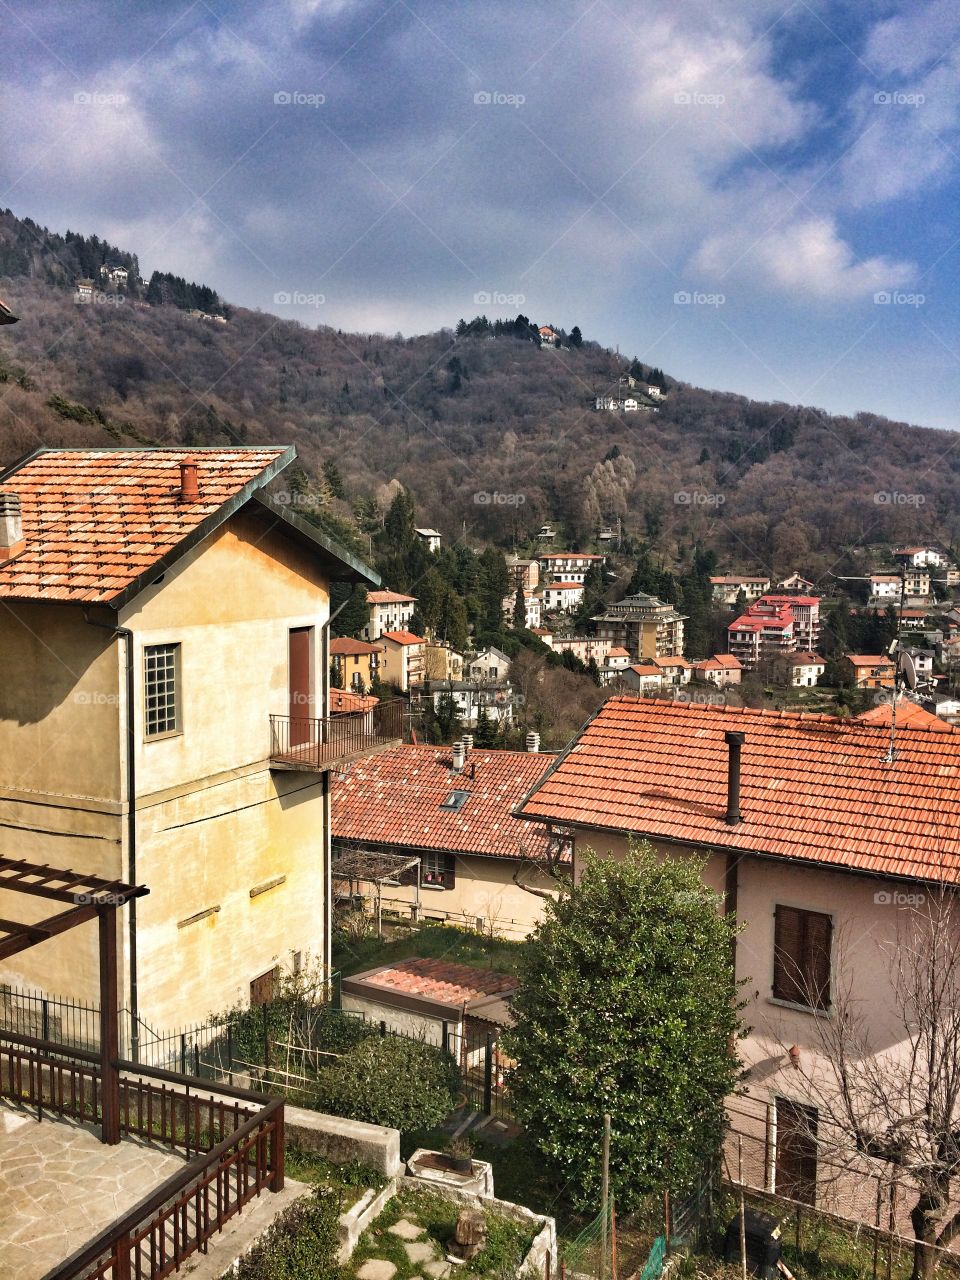 Brunate, Italy from the hill 